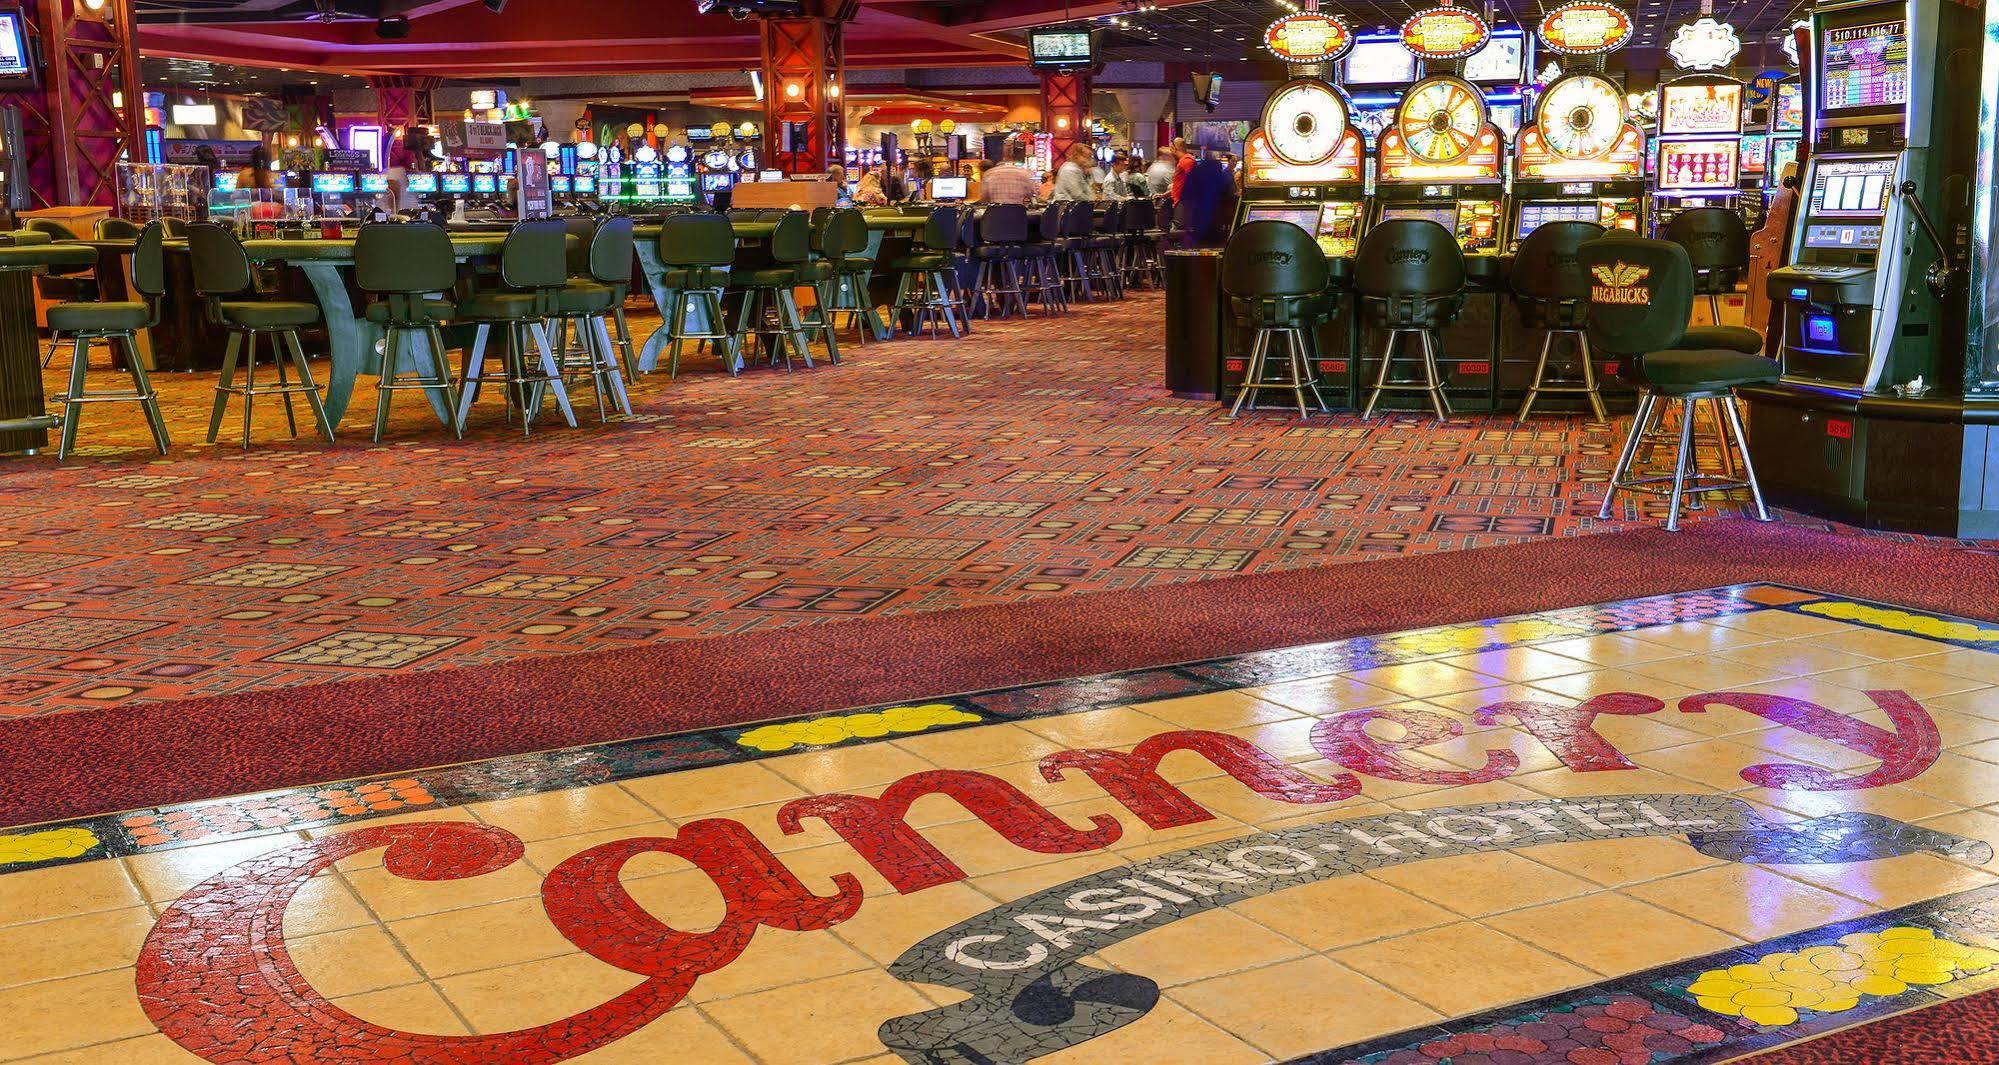 CANNERY HOTEL & CASINO LAS VEGAS, NV 3* (United States) - from US$ 51 |  BOOKED